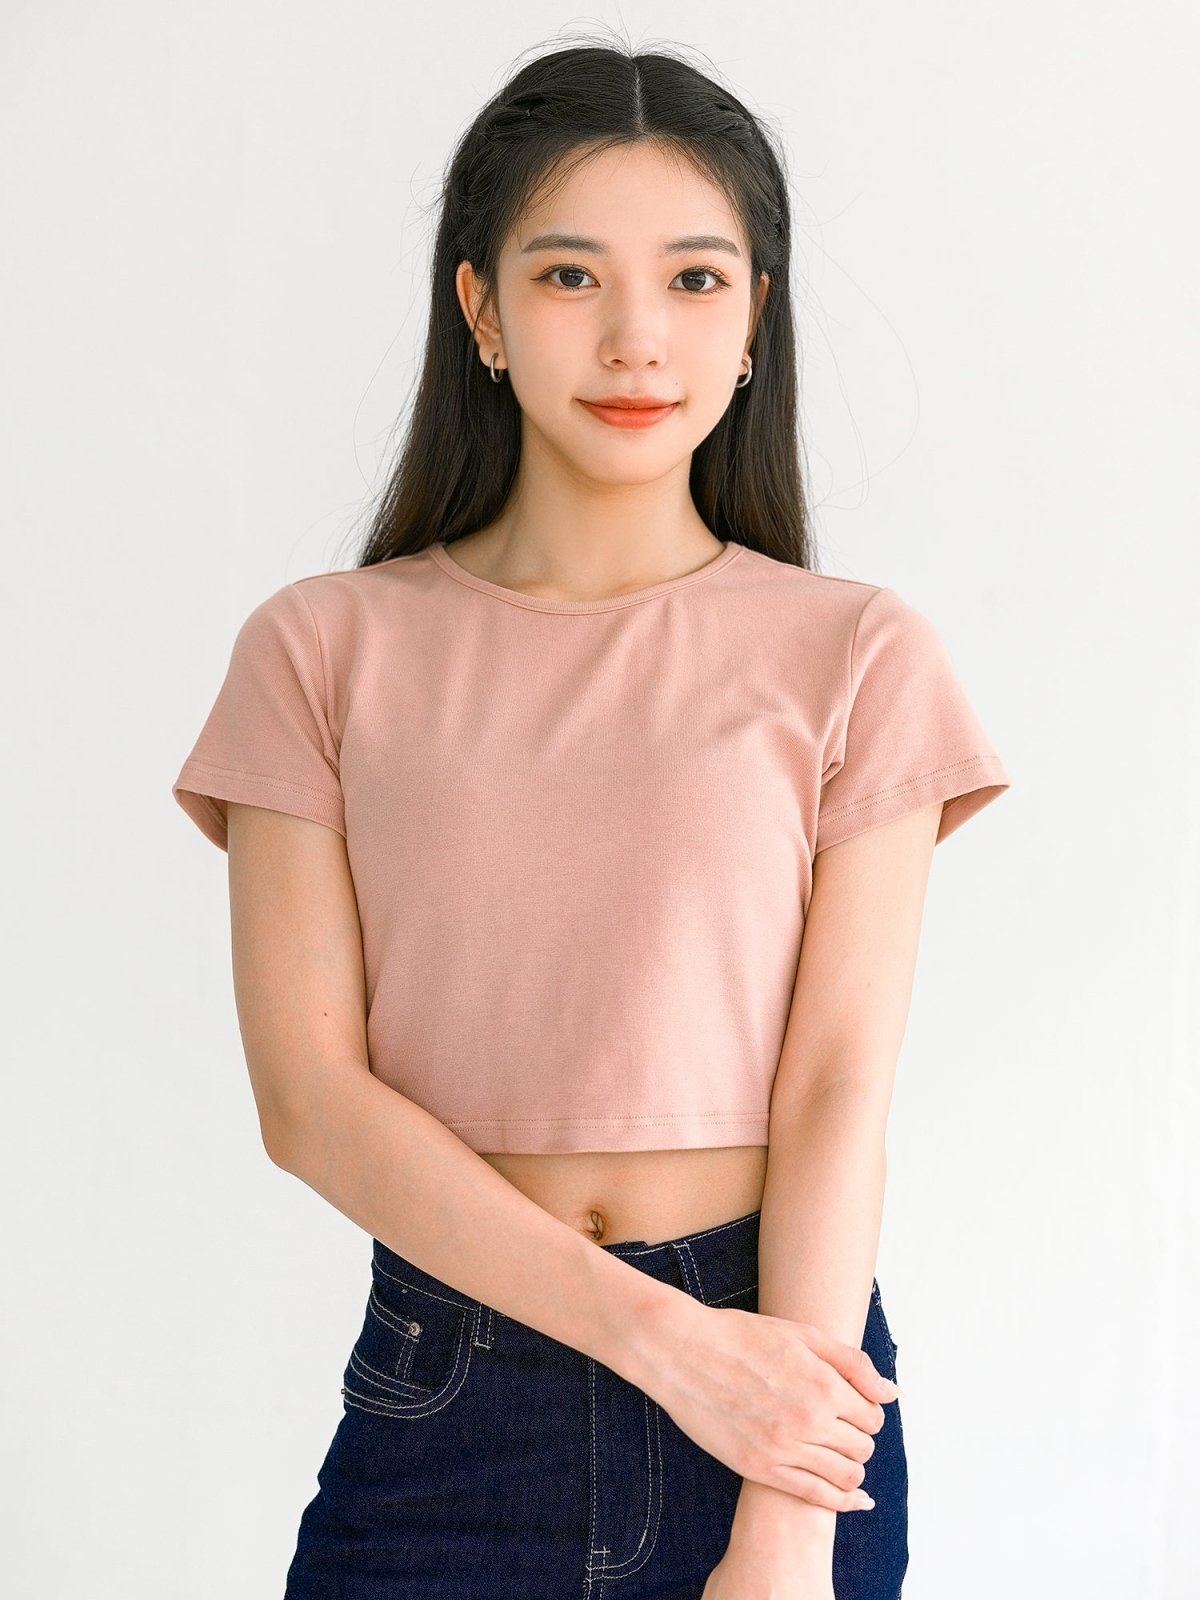 Everyday Stretchy Crop Tee (7 Colours) - DAG-DD0407-23DustyPinkS - Dusty Pink - S - D'zage Designs